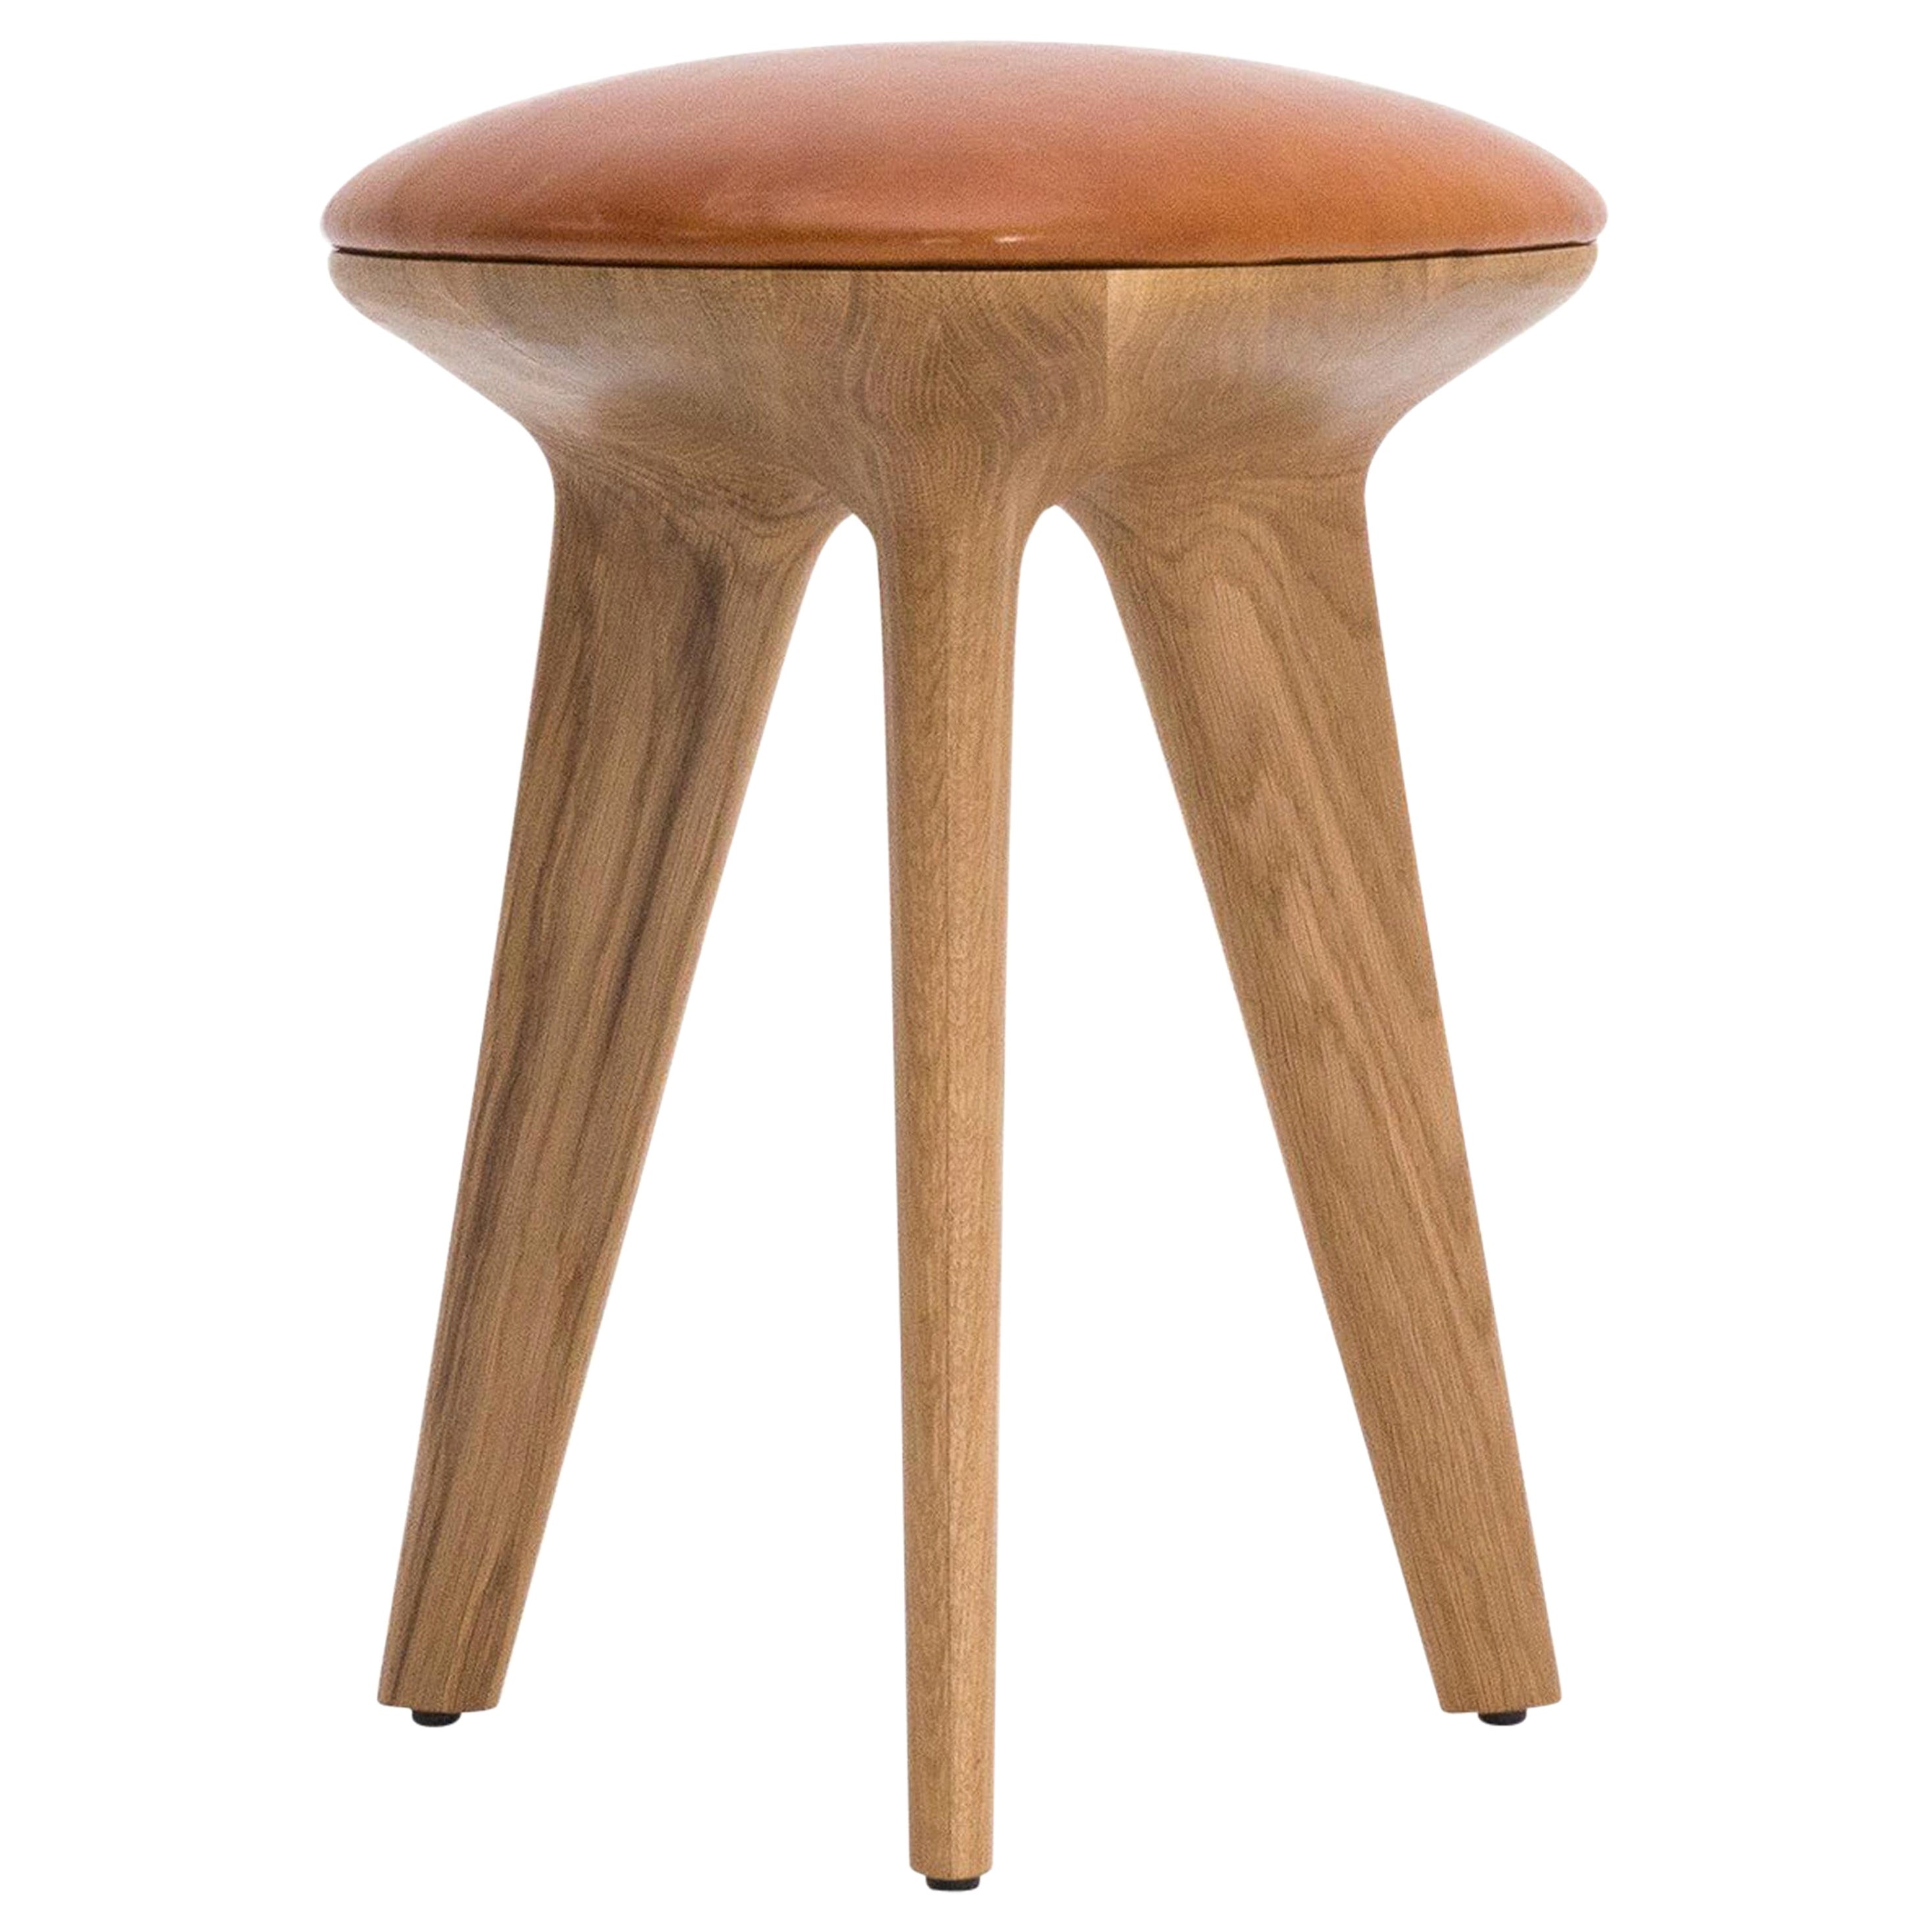 Rotor, Solid Oak Stool with Padded Tan Leather Seat by Made in Ratio